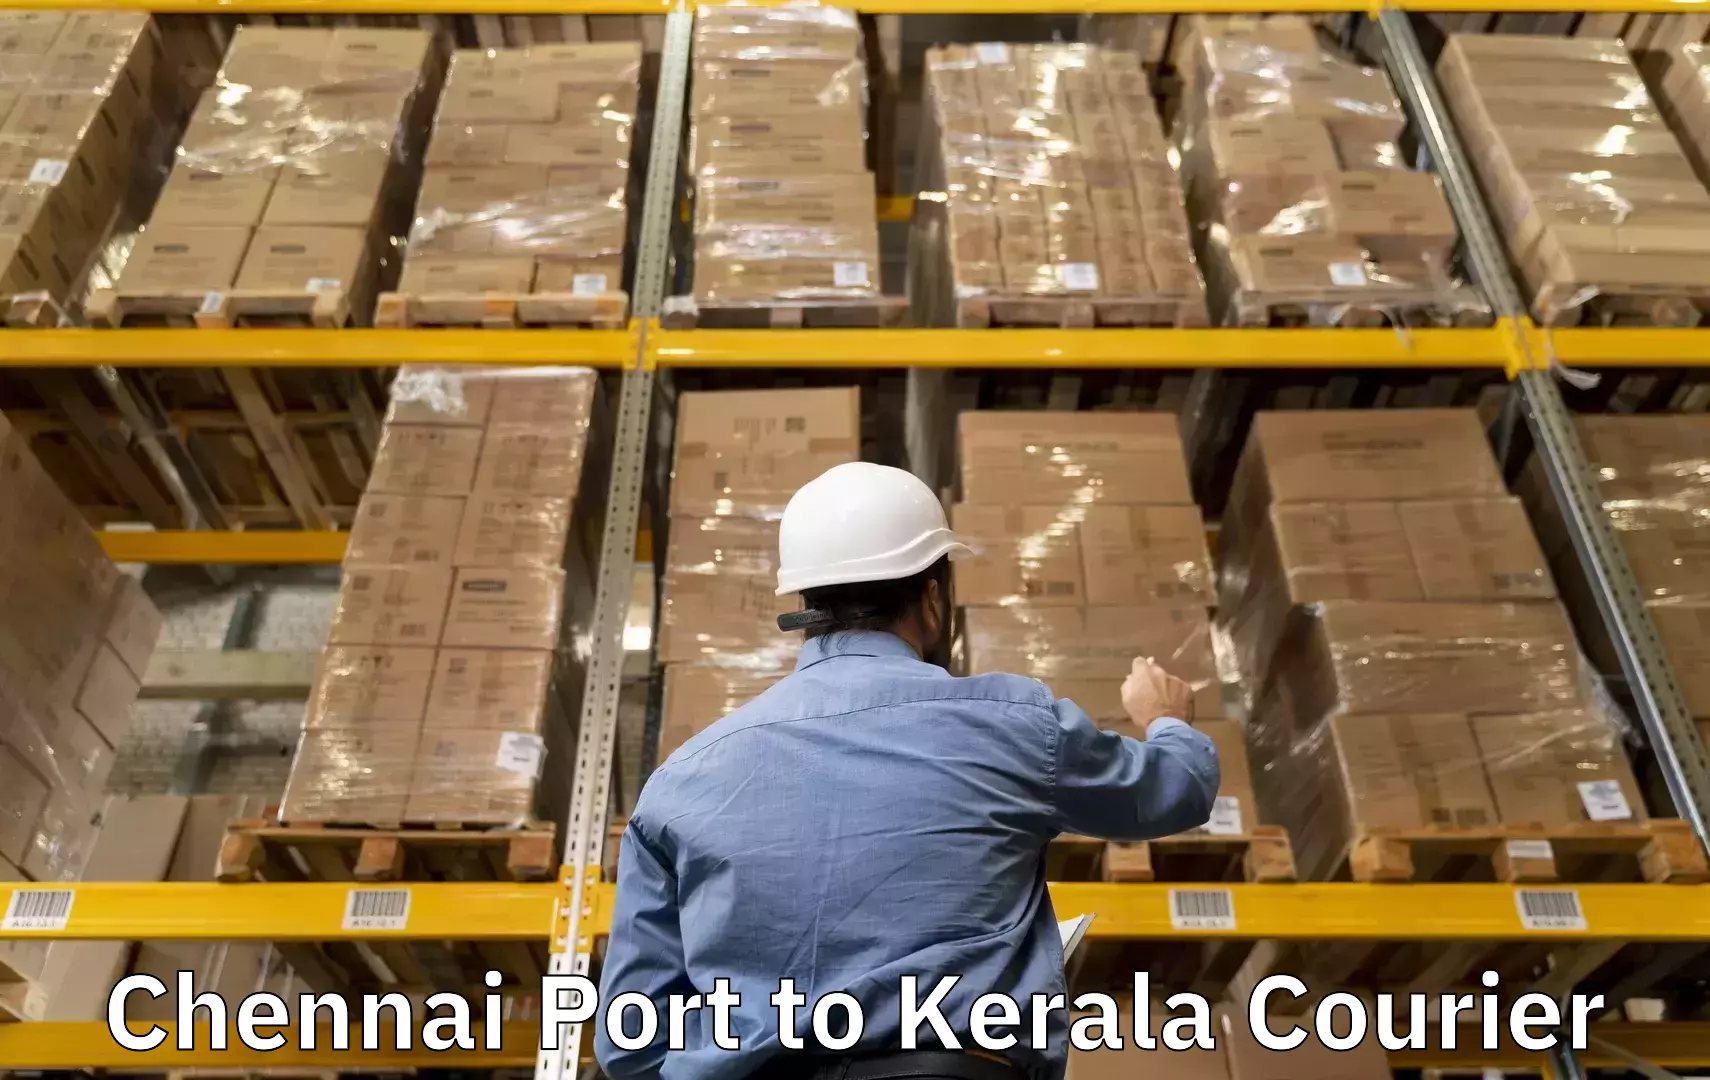 Luggage delivery rates Chennai Port to Kerala